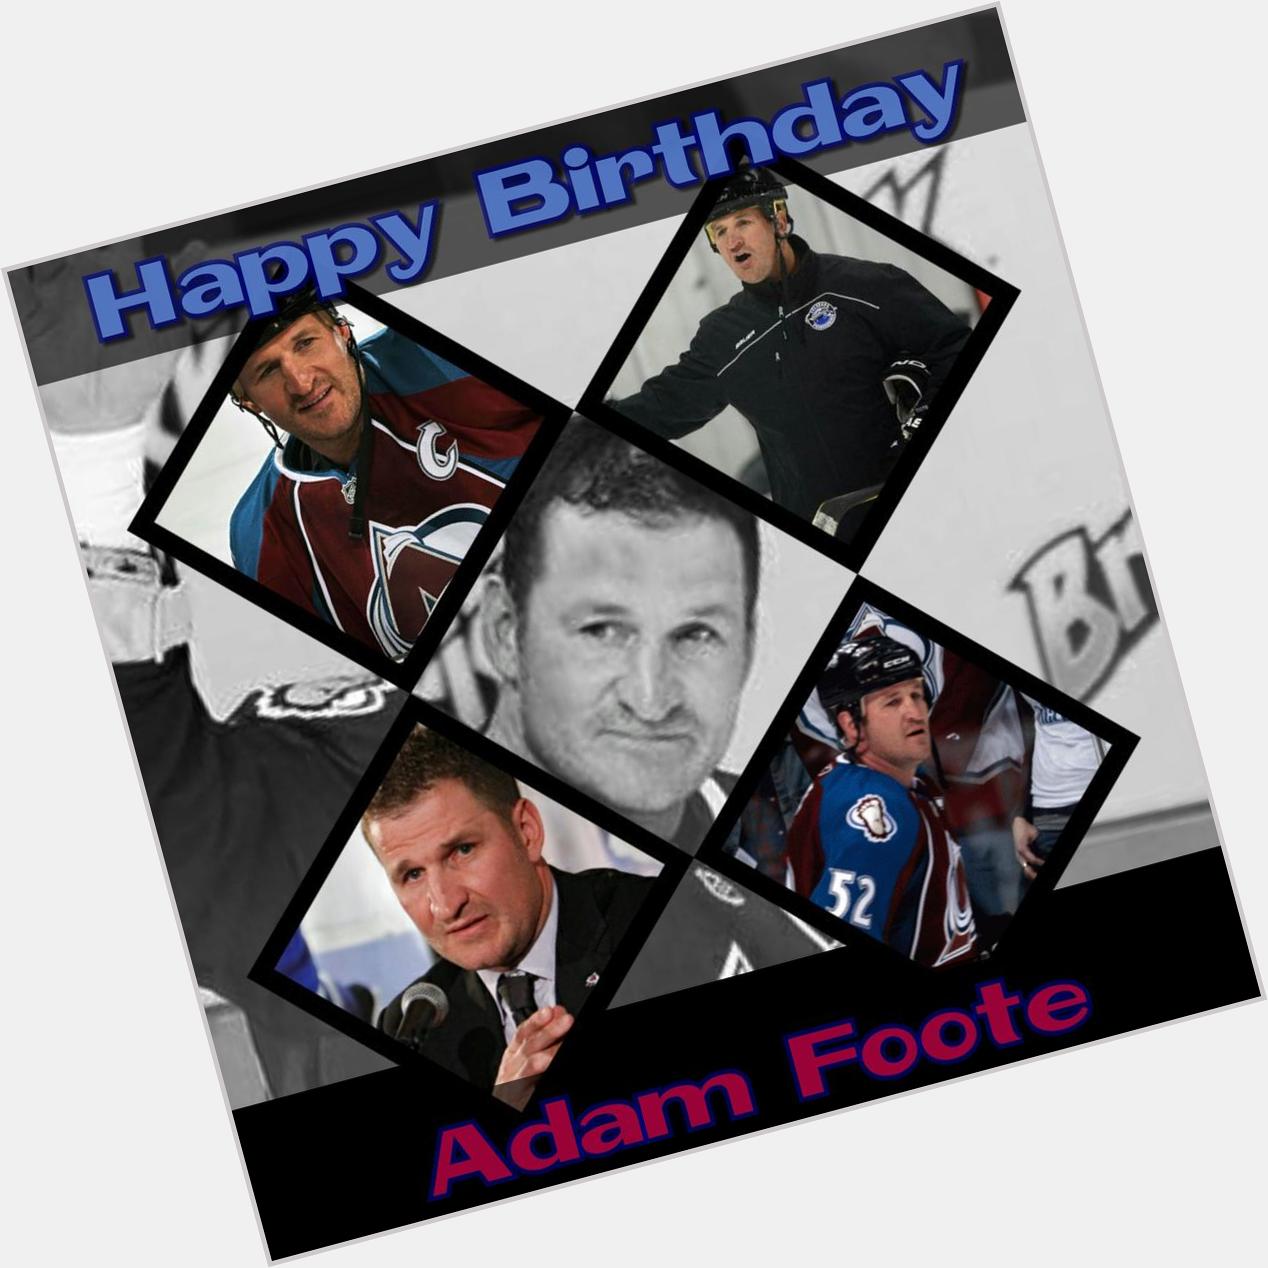 Here is a great big Happy Birthday to Adam Foote!!!! Happy birthday to you Footer!!! 